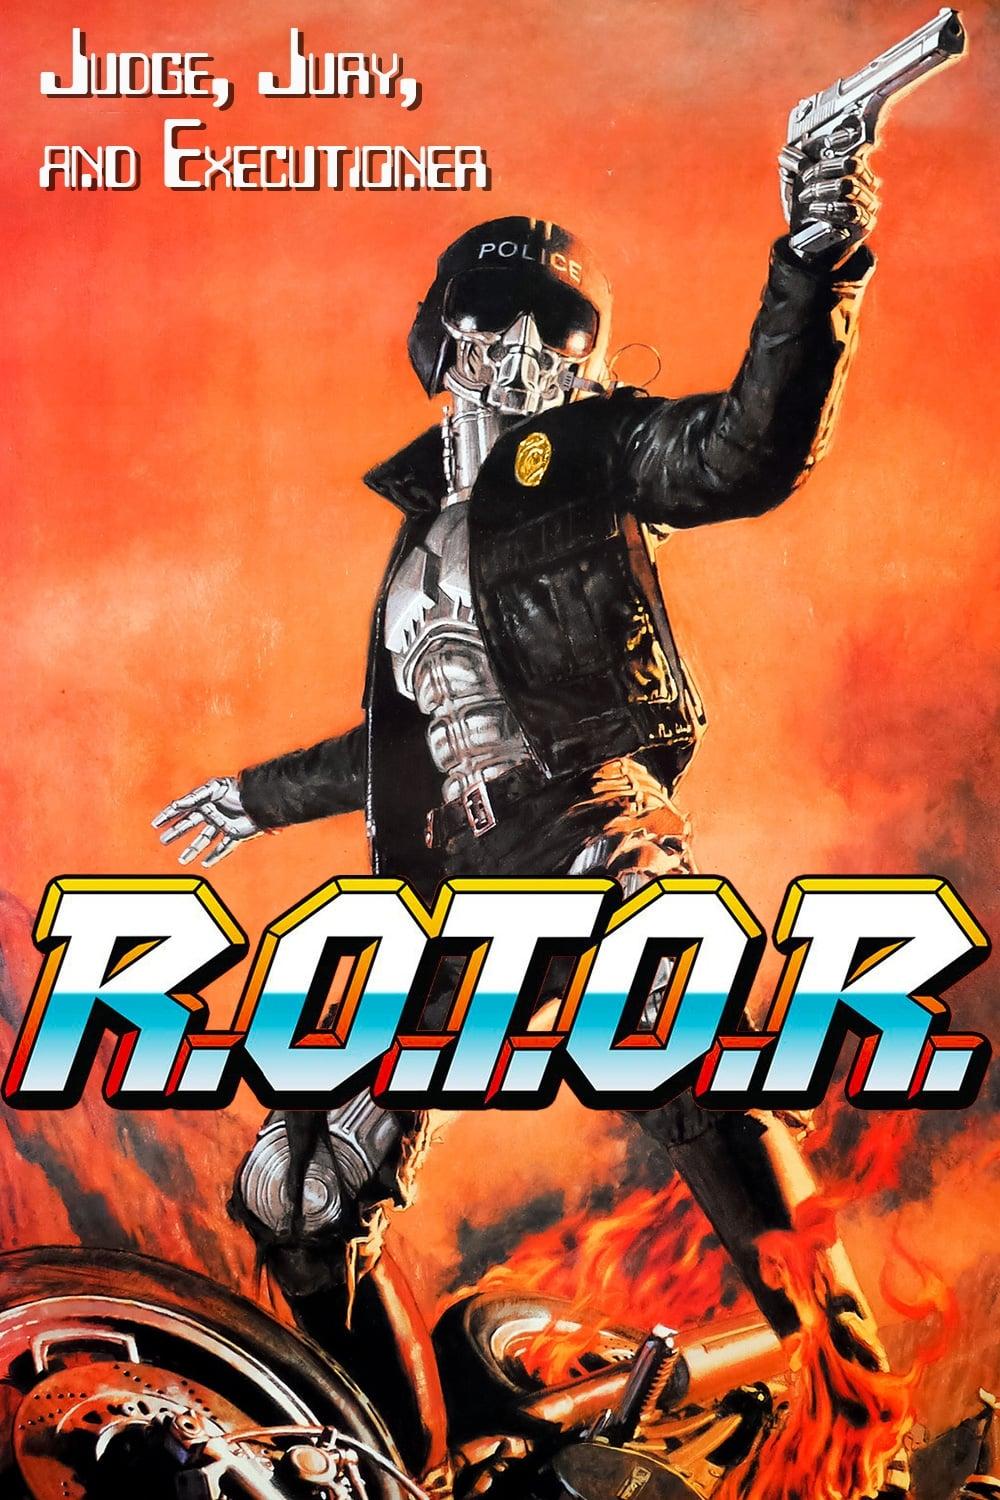 R.O.T.O.R. poster